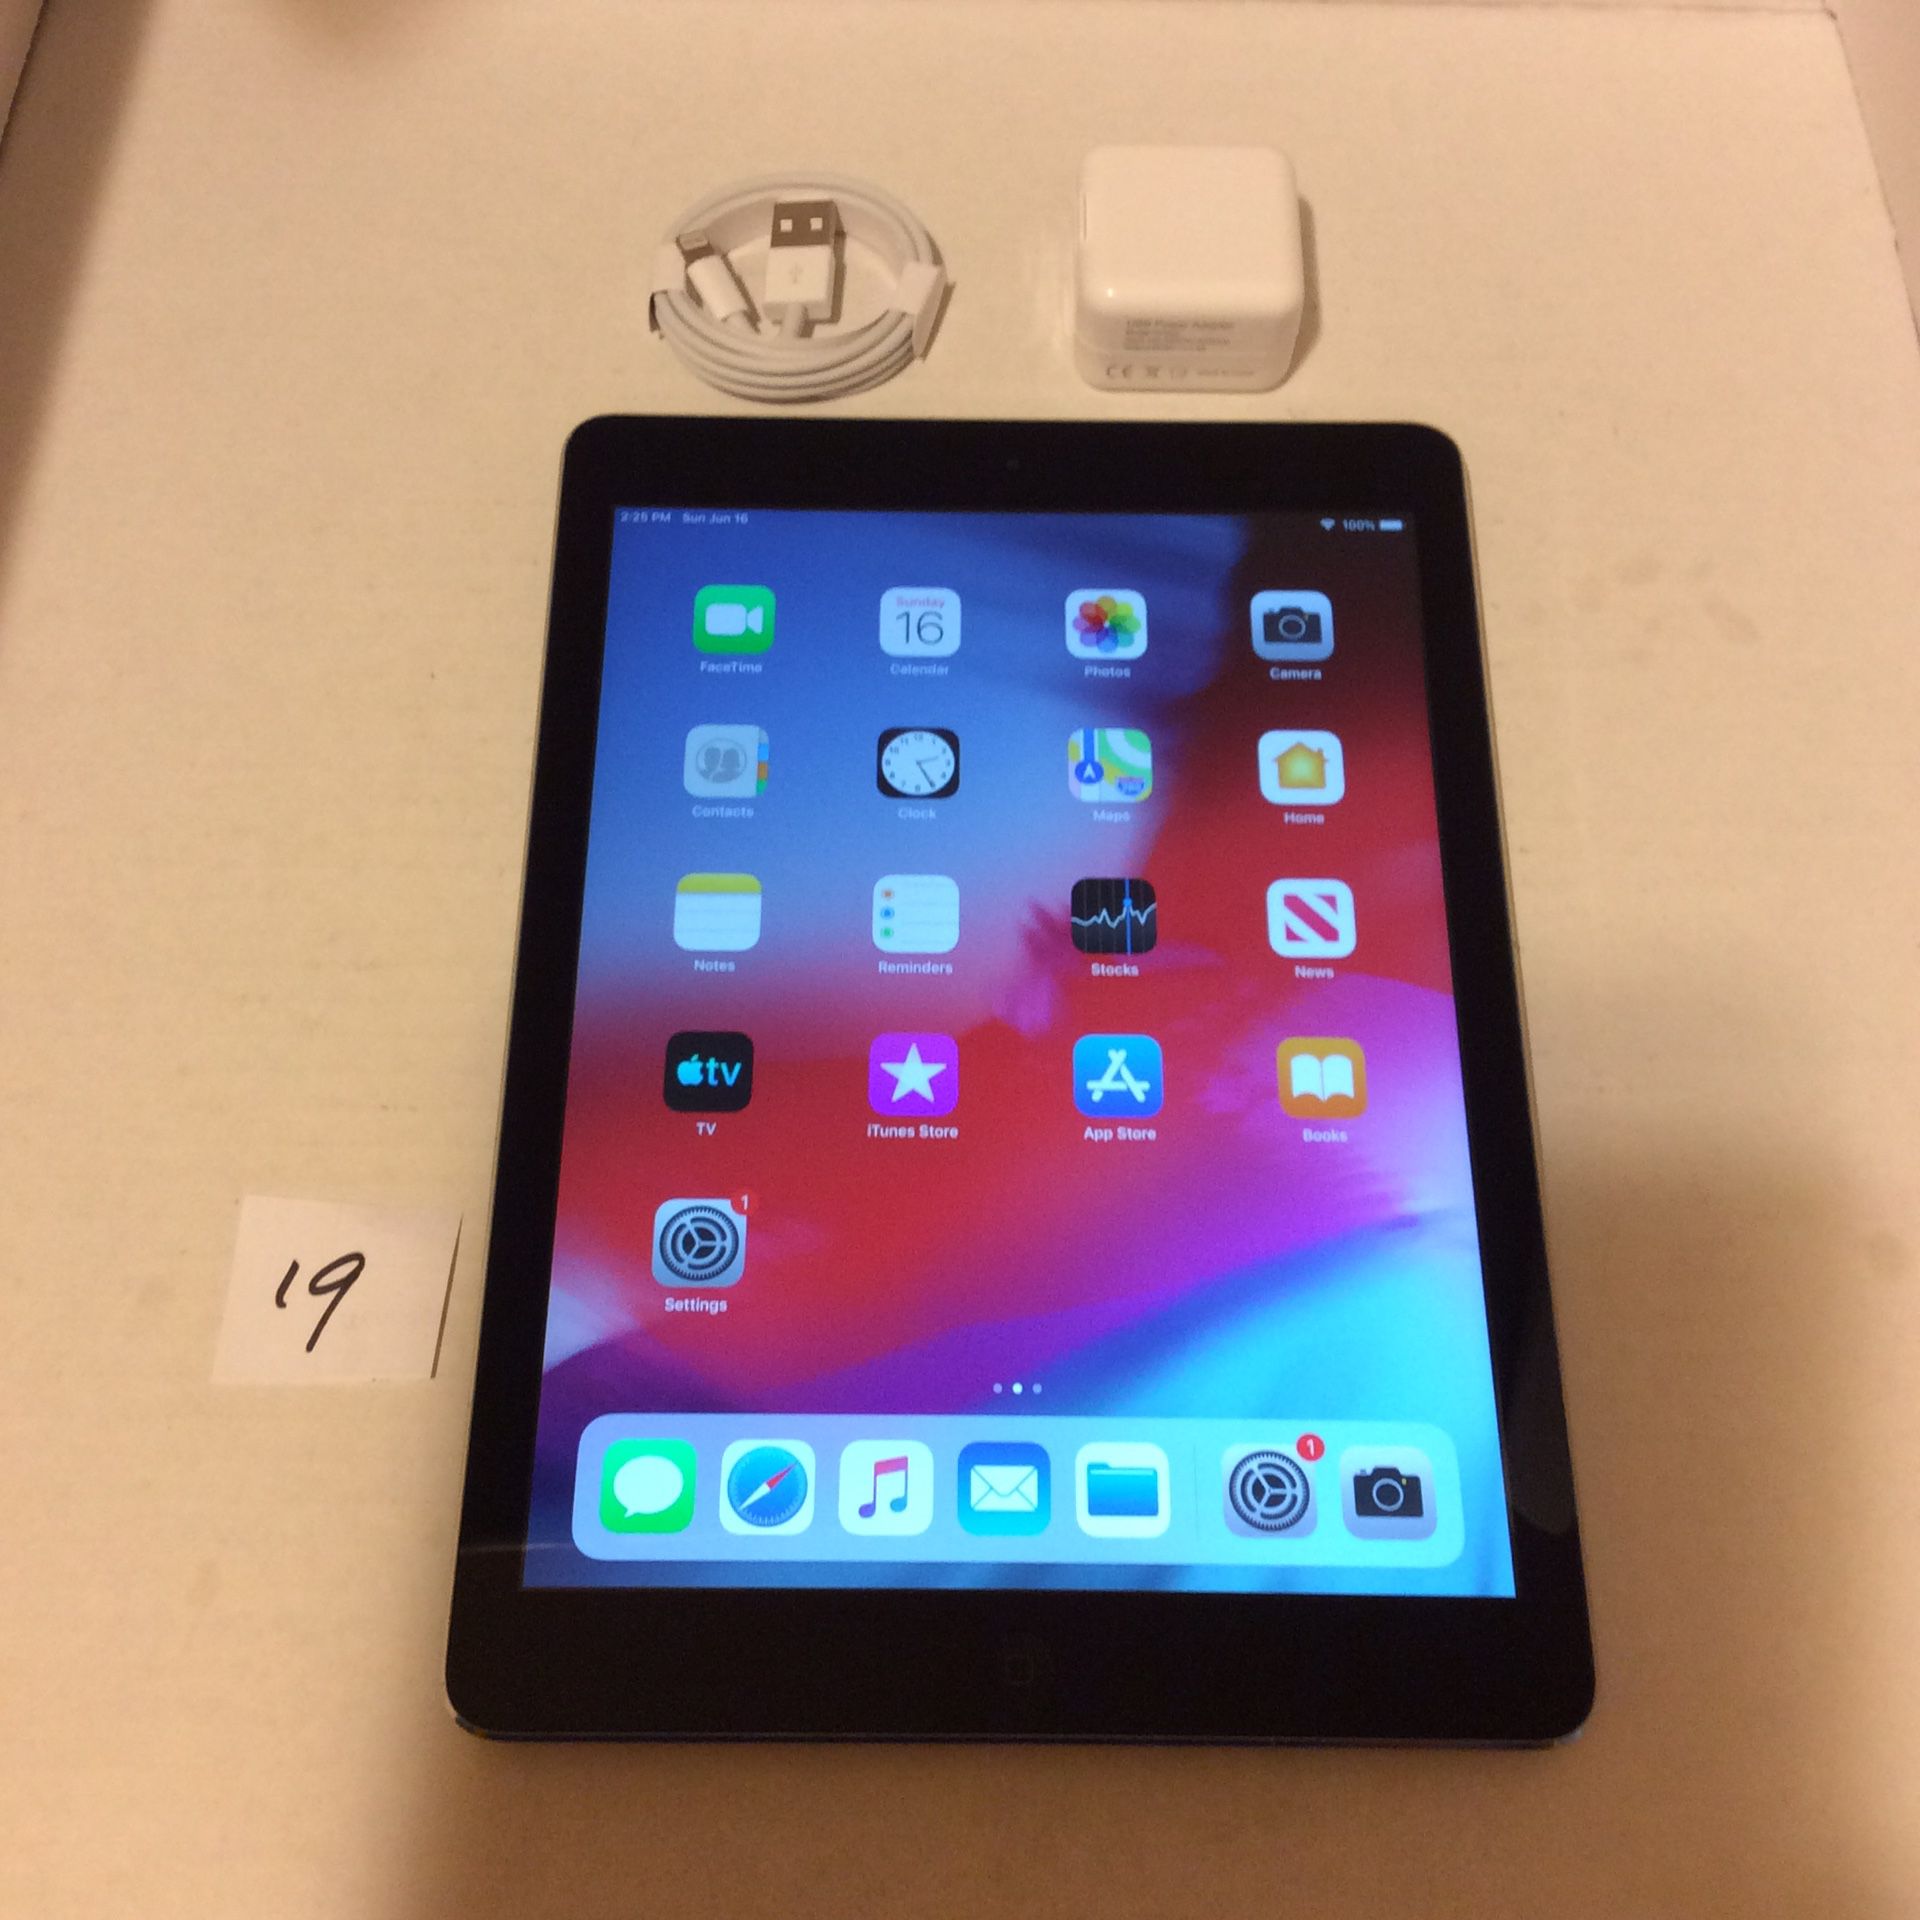 Apple iPad Air 1st,64gb,WiFi 9.7”Gray/Black ,A1474,Clean iCloud,Fully Functional,Good condition,